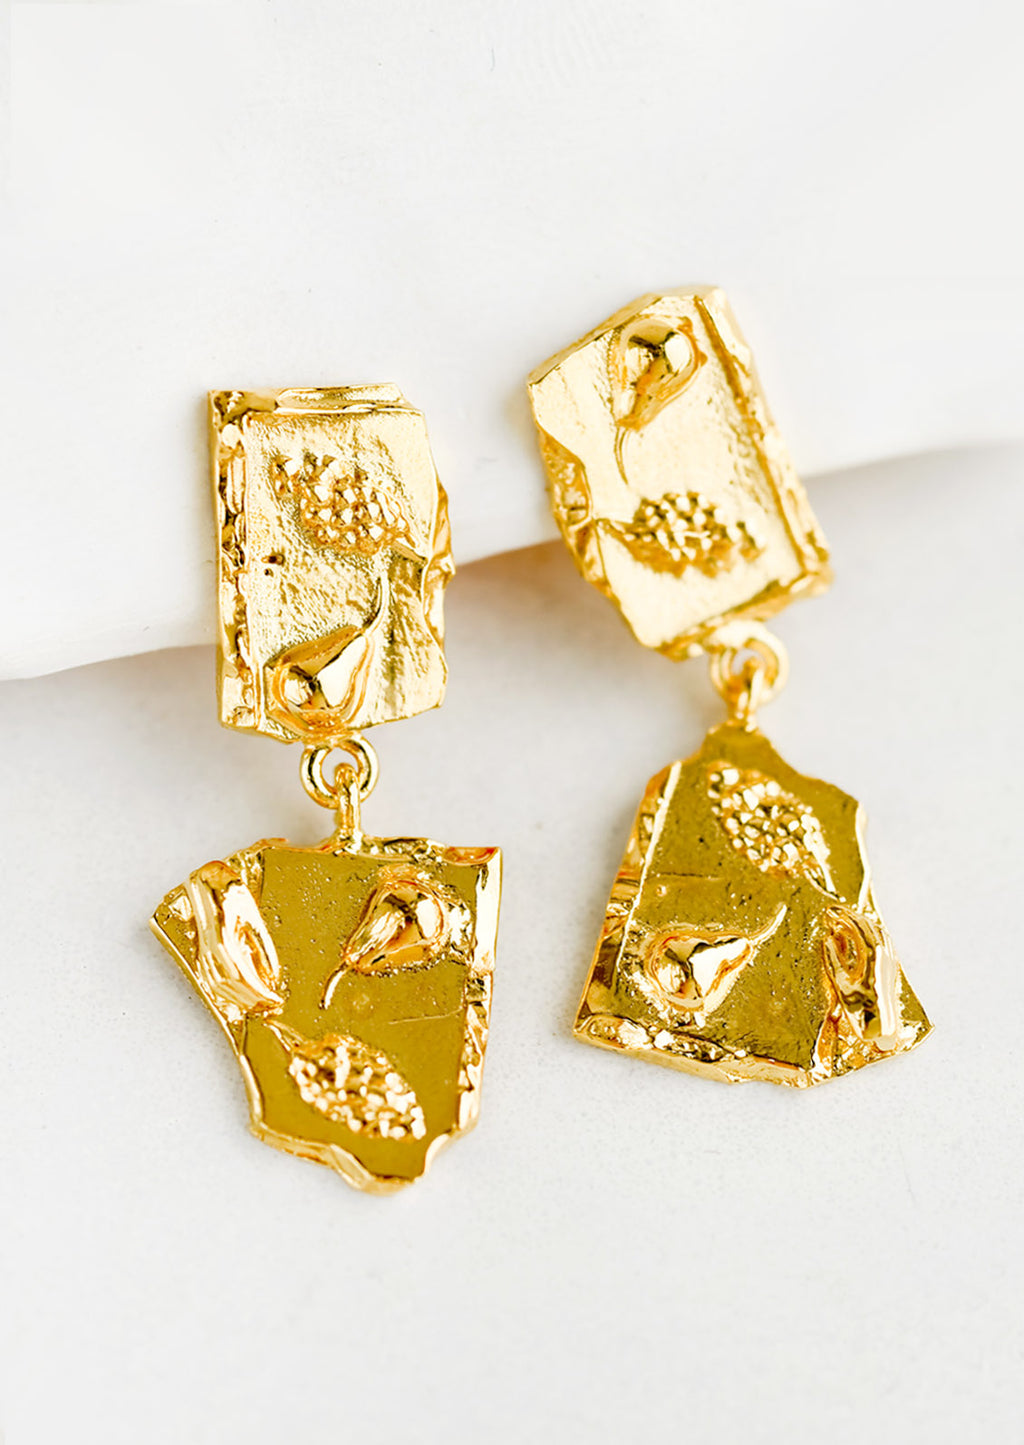 1: A pair of earrings with double broken tile silhouette.